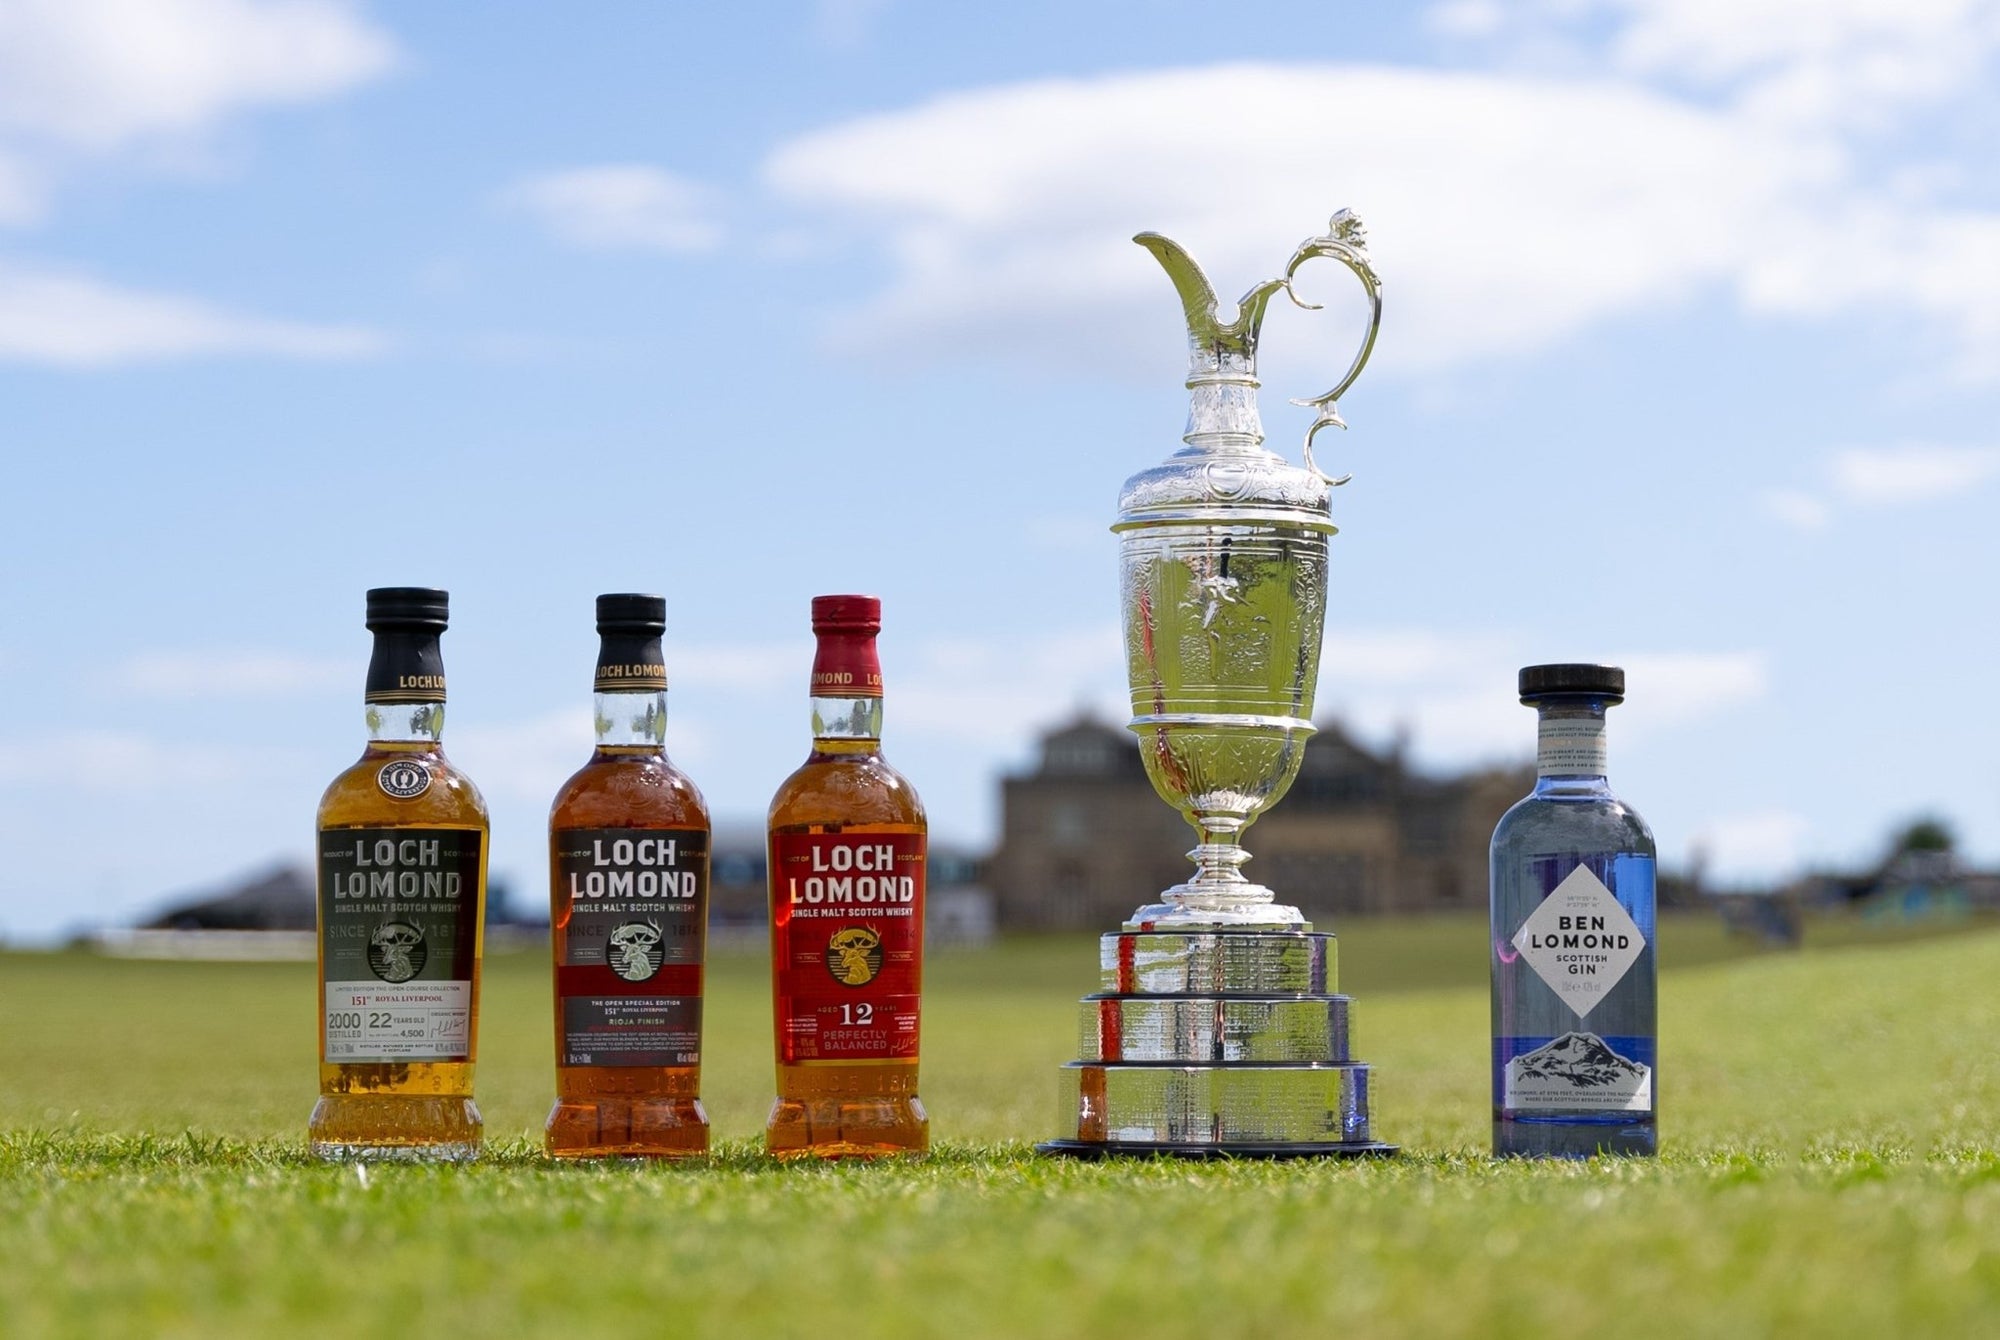 Loch Lomond Whiskies Signs New Agreement with The R&A for The Open and AIG Women’s Open - Loch Lomond Group